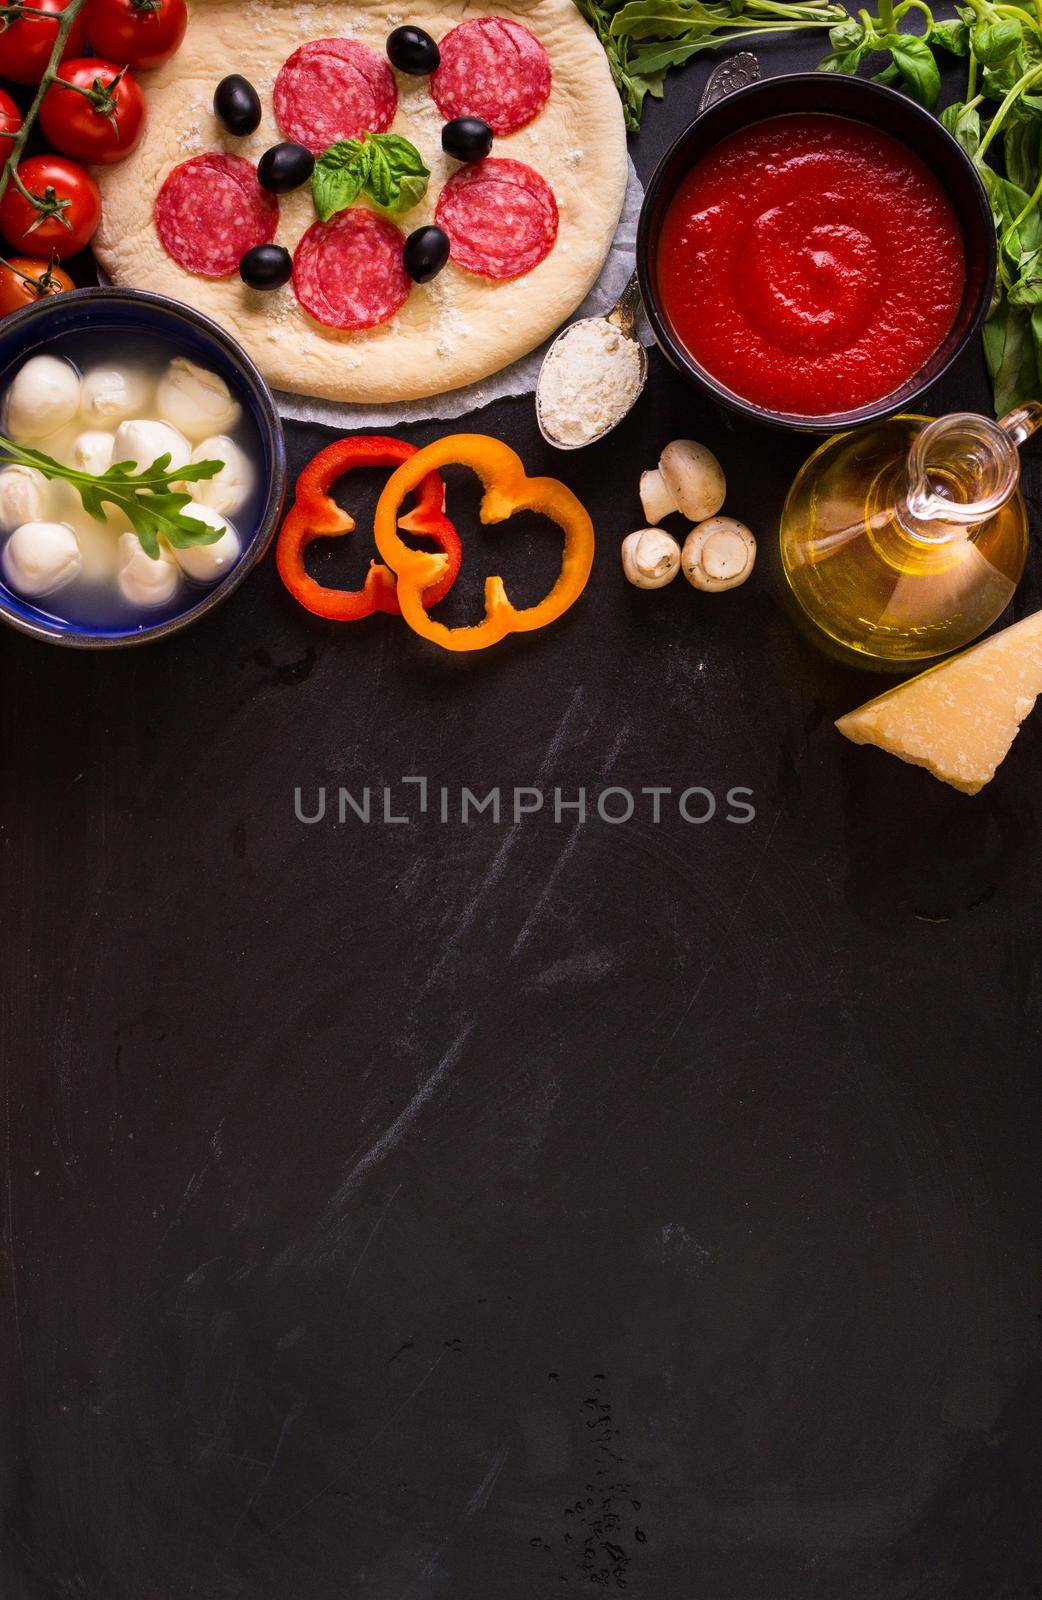 Pizza making background. Ingredients for making pizza. Space for text. Pizza dough, flour, cheese, mozzarella, tomatoes, basil, pepperoni, olives and rolling pin over black chalkboard. Top view